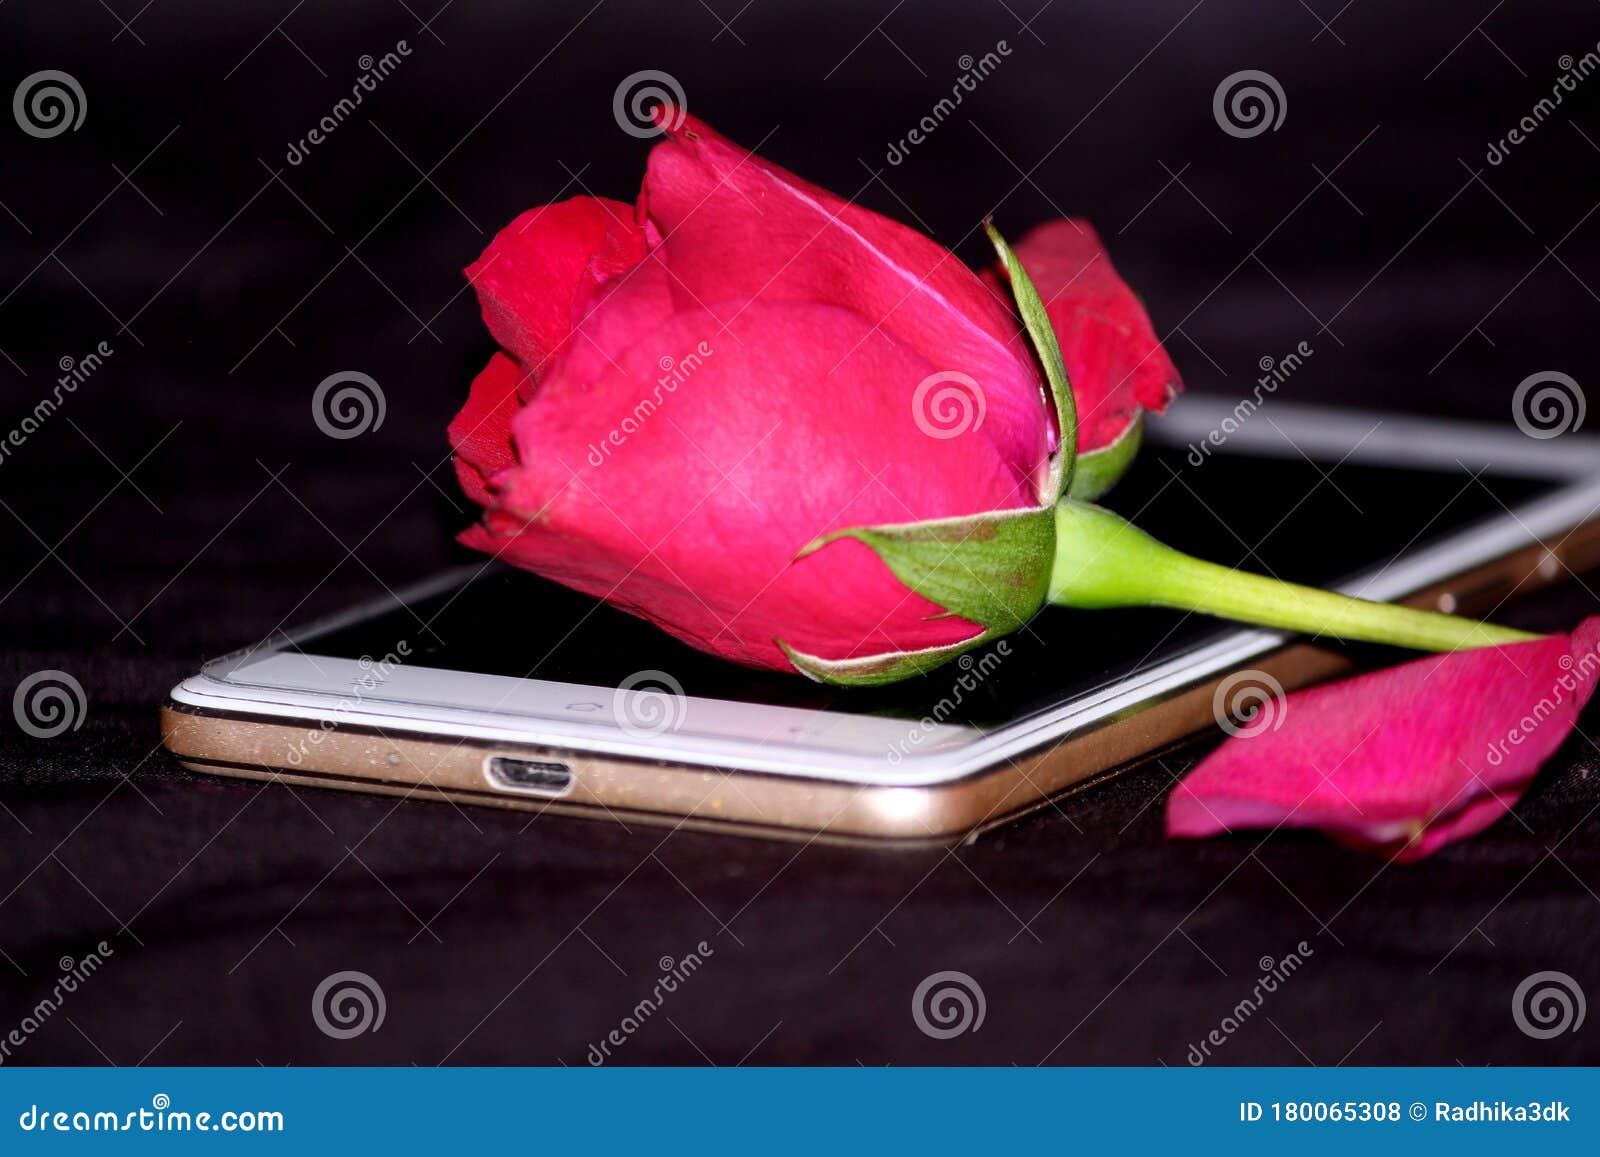 Romantic Proposal, Red Rose Put on Mobile Stock Photo - Image of ...